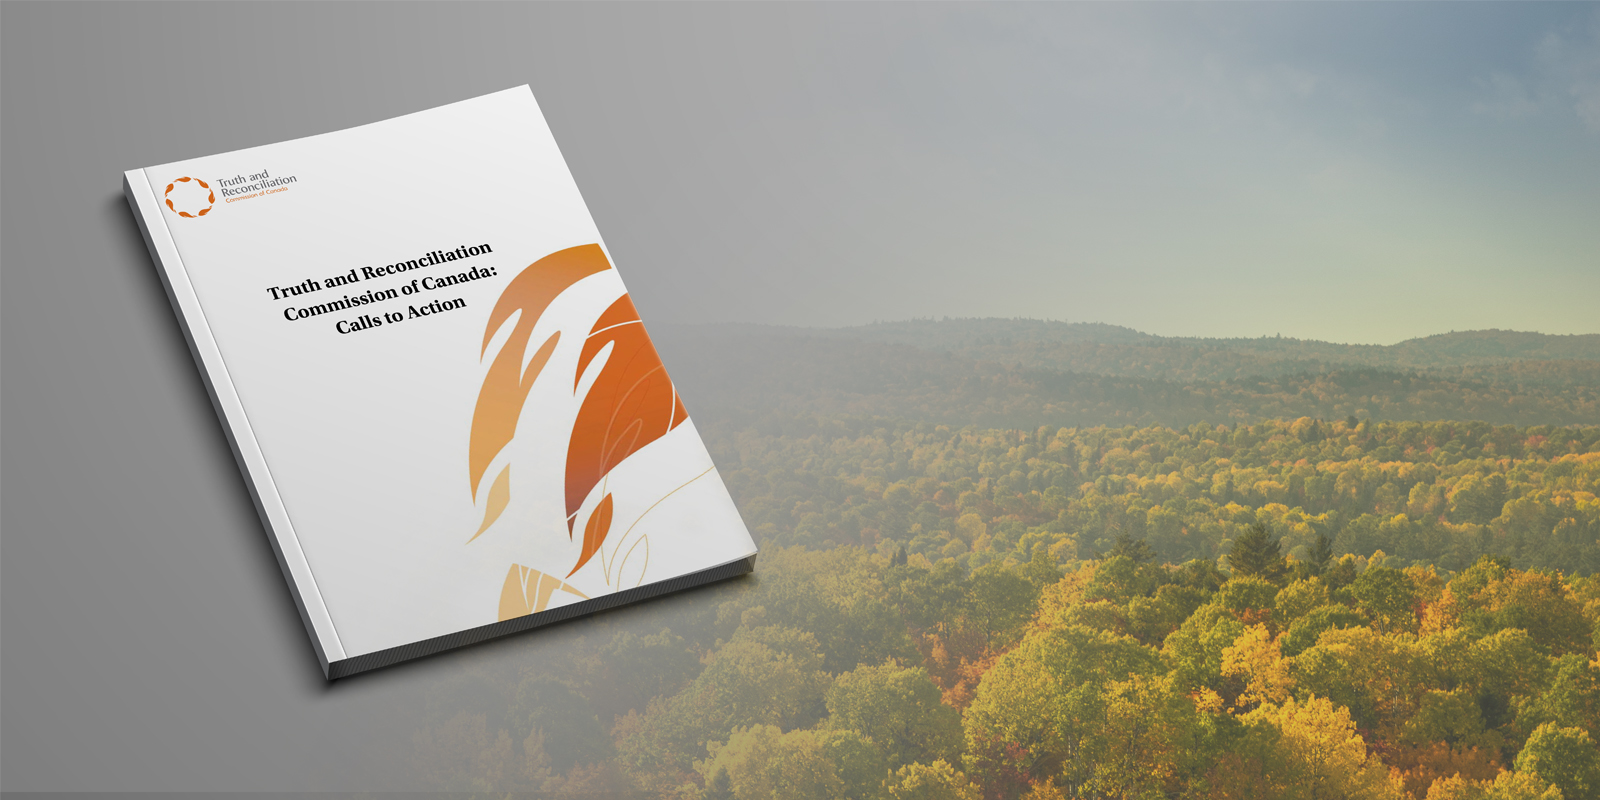 TRC booklet on grey background with northern ontario forest